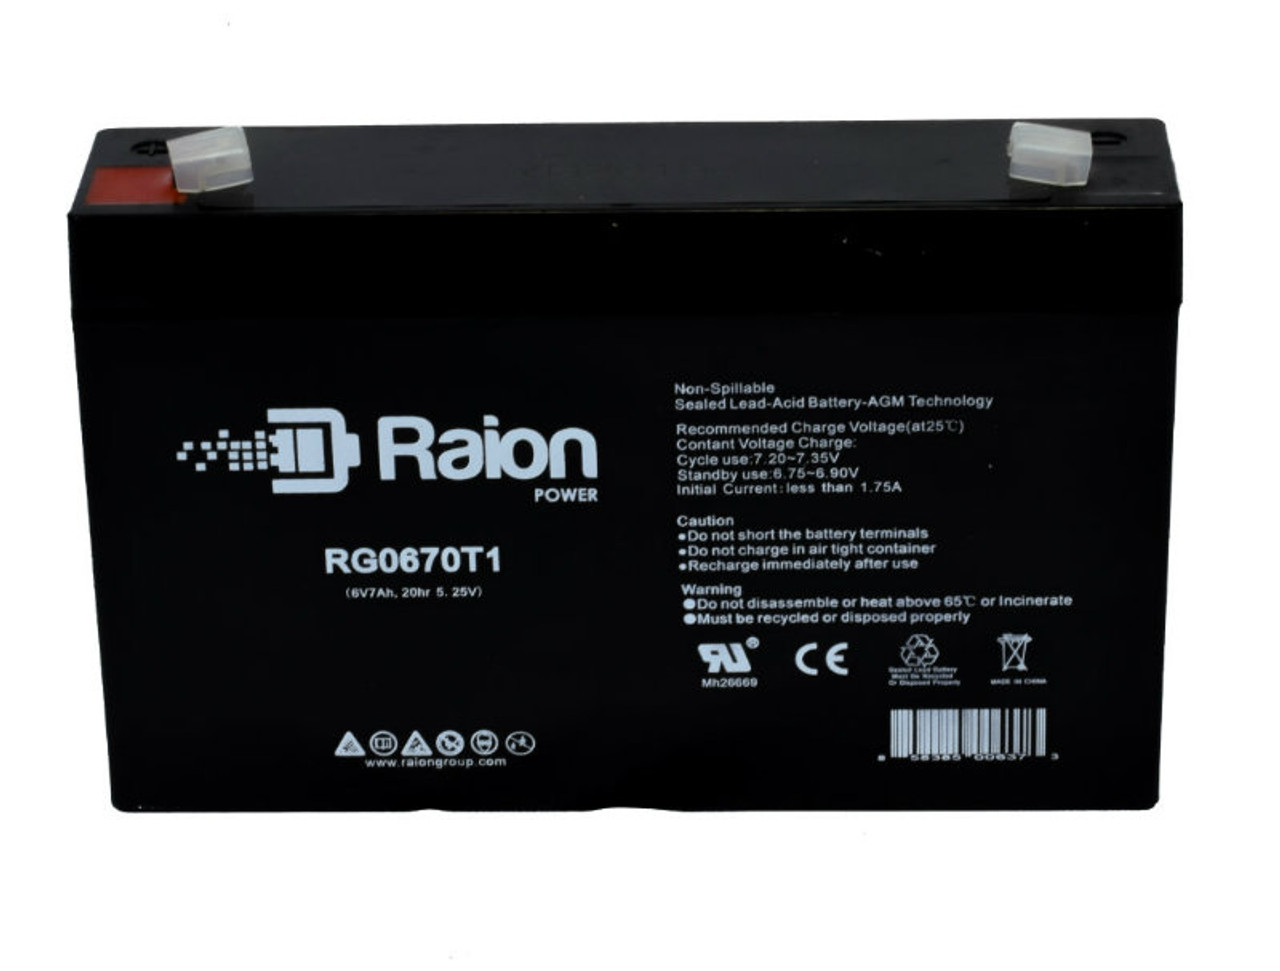 Raion Power RG0670T1 Replacement Battery Cartridge for Kid Motorz 1517 Superb Quad Blue & Green